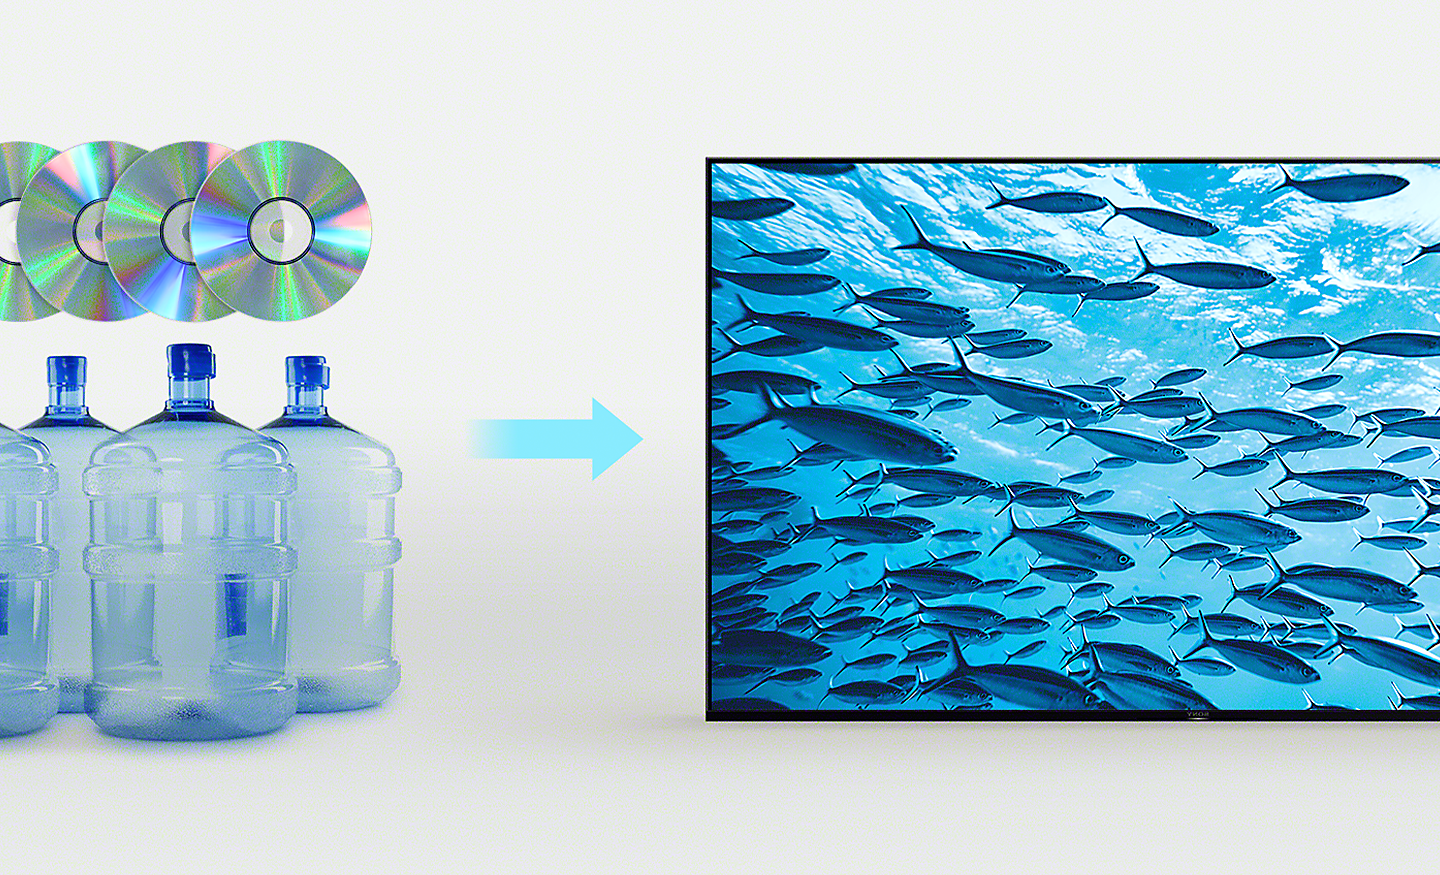 Image of four plastic bottles and four compact discs on left side of image and an arrow pointing to a BRAVA TV with a screenshot of fish swimming in an ocean on right side of image